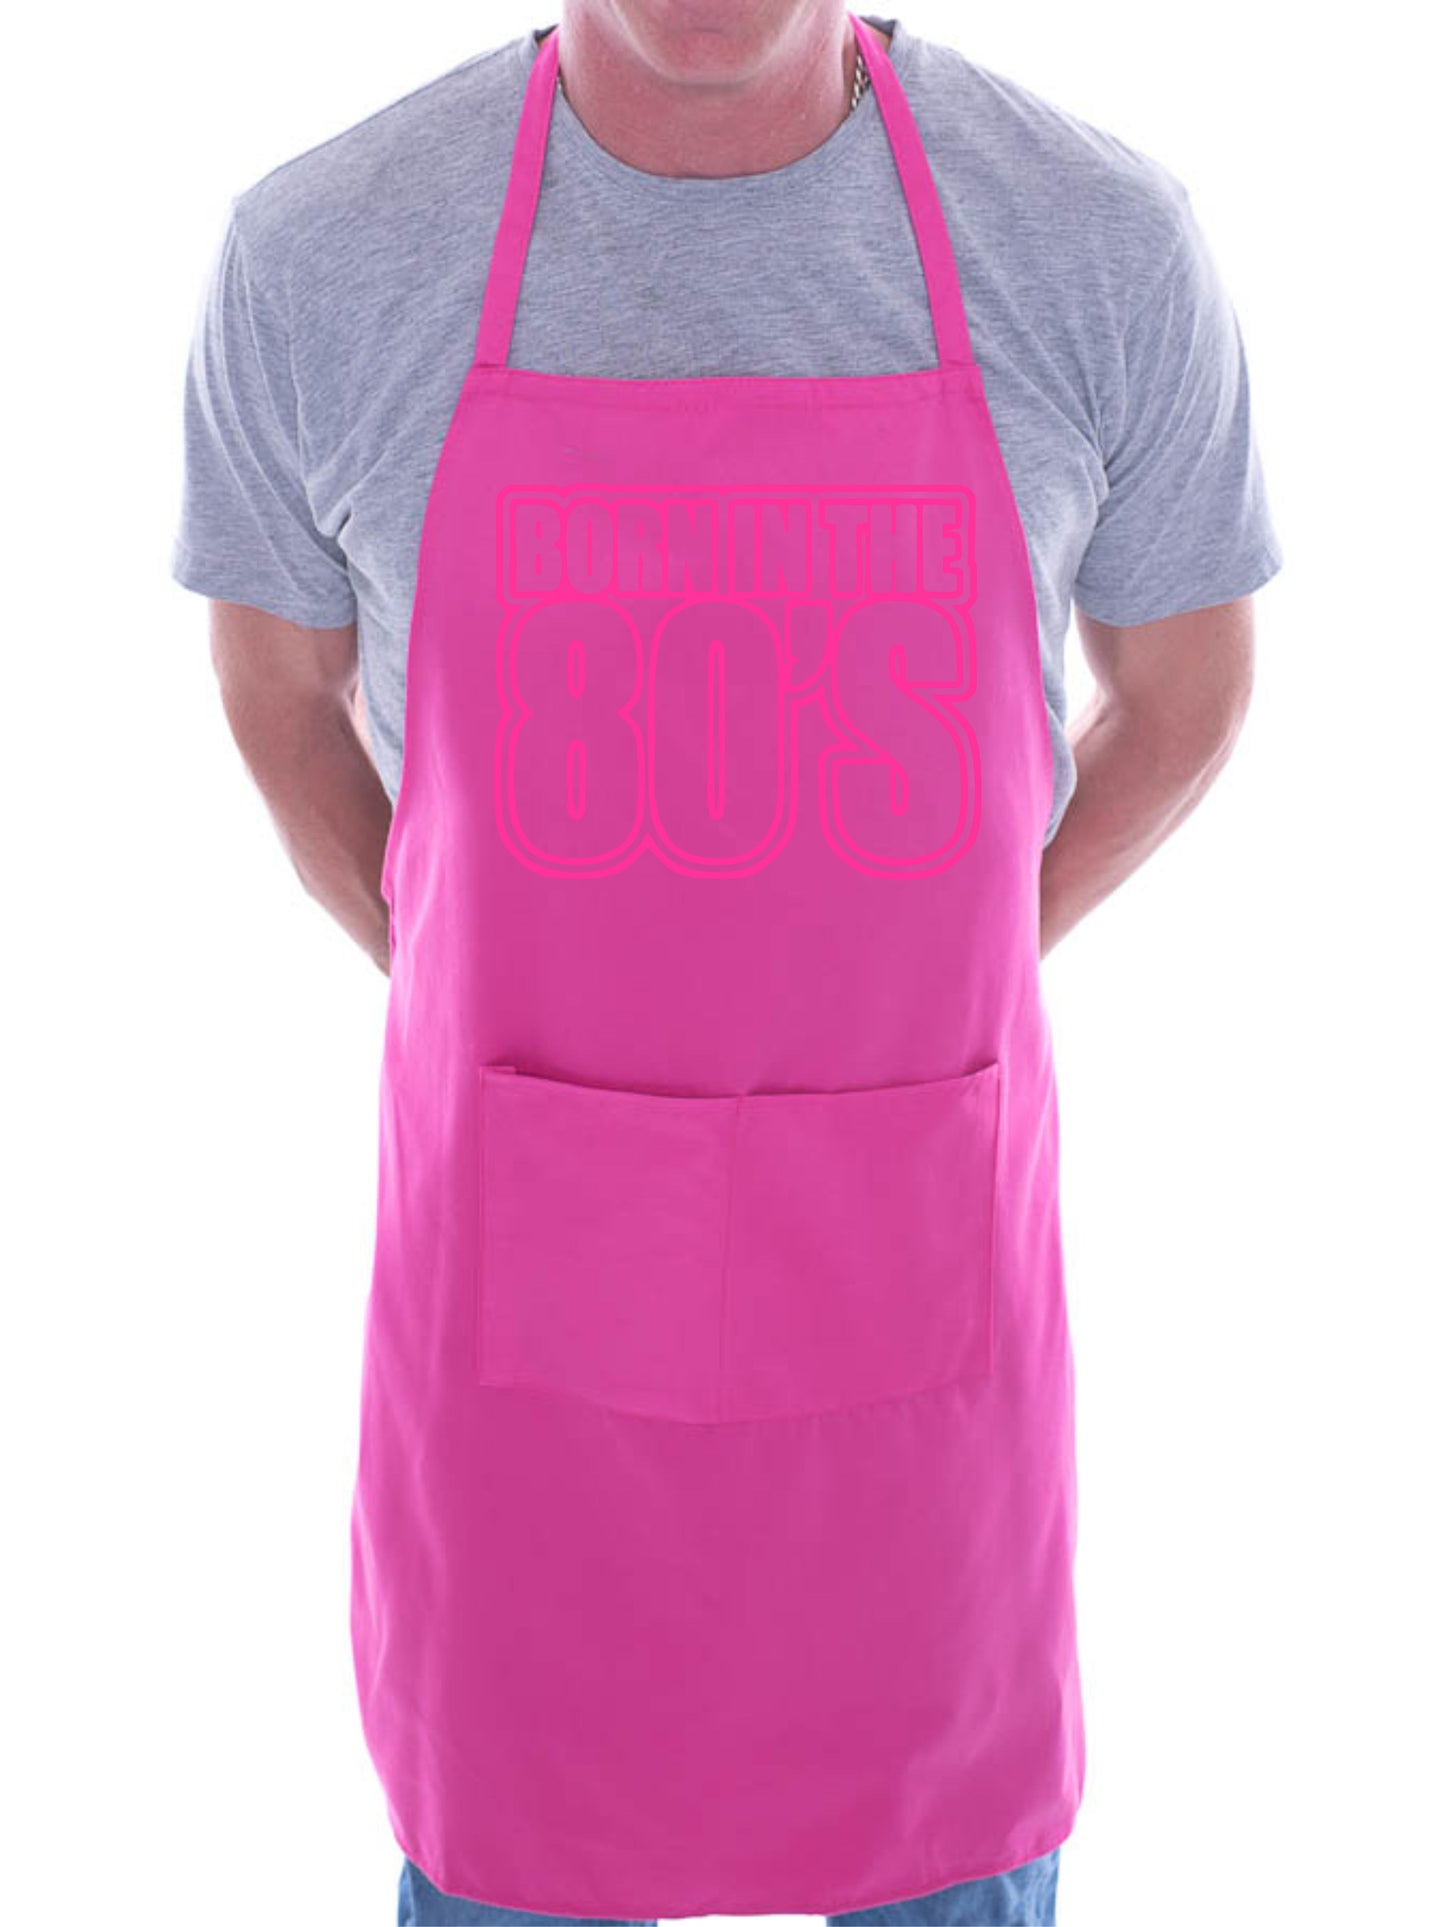 Born In The 80's Eighties Birthday BBQ Cooking Novelty Apron